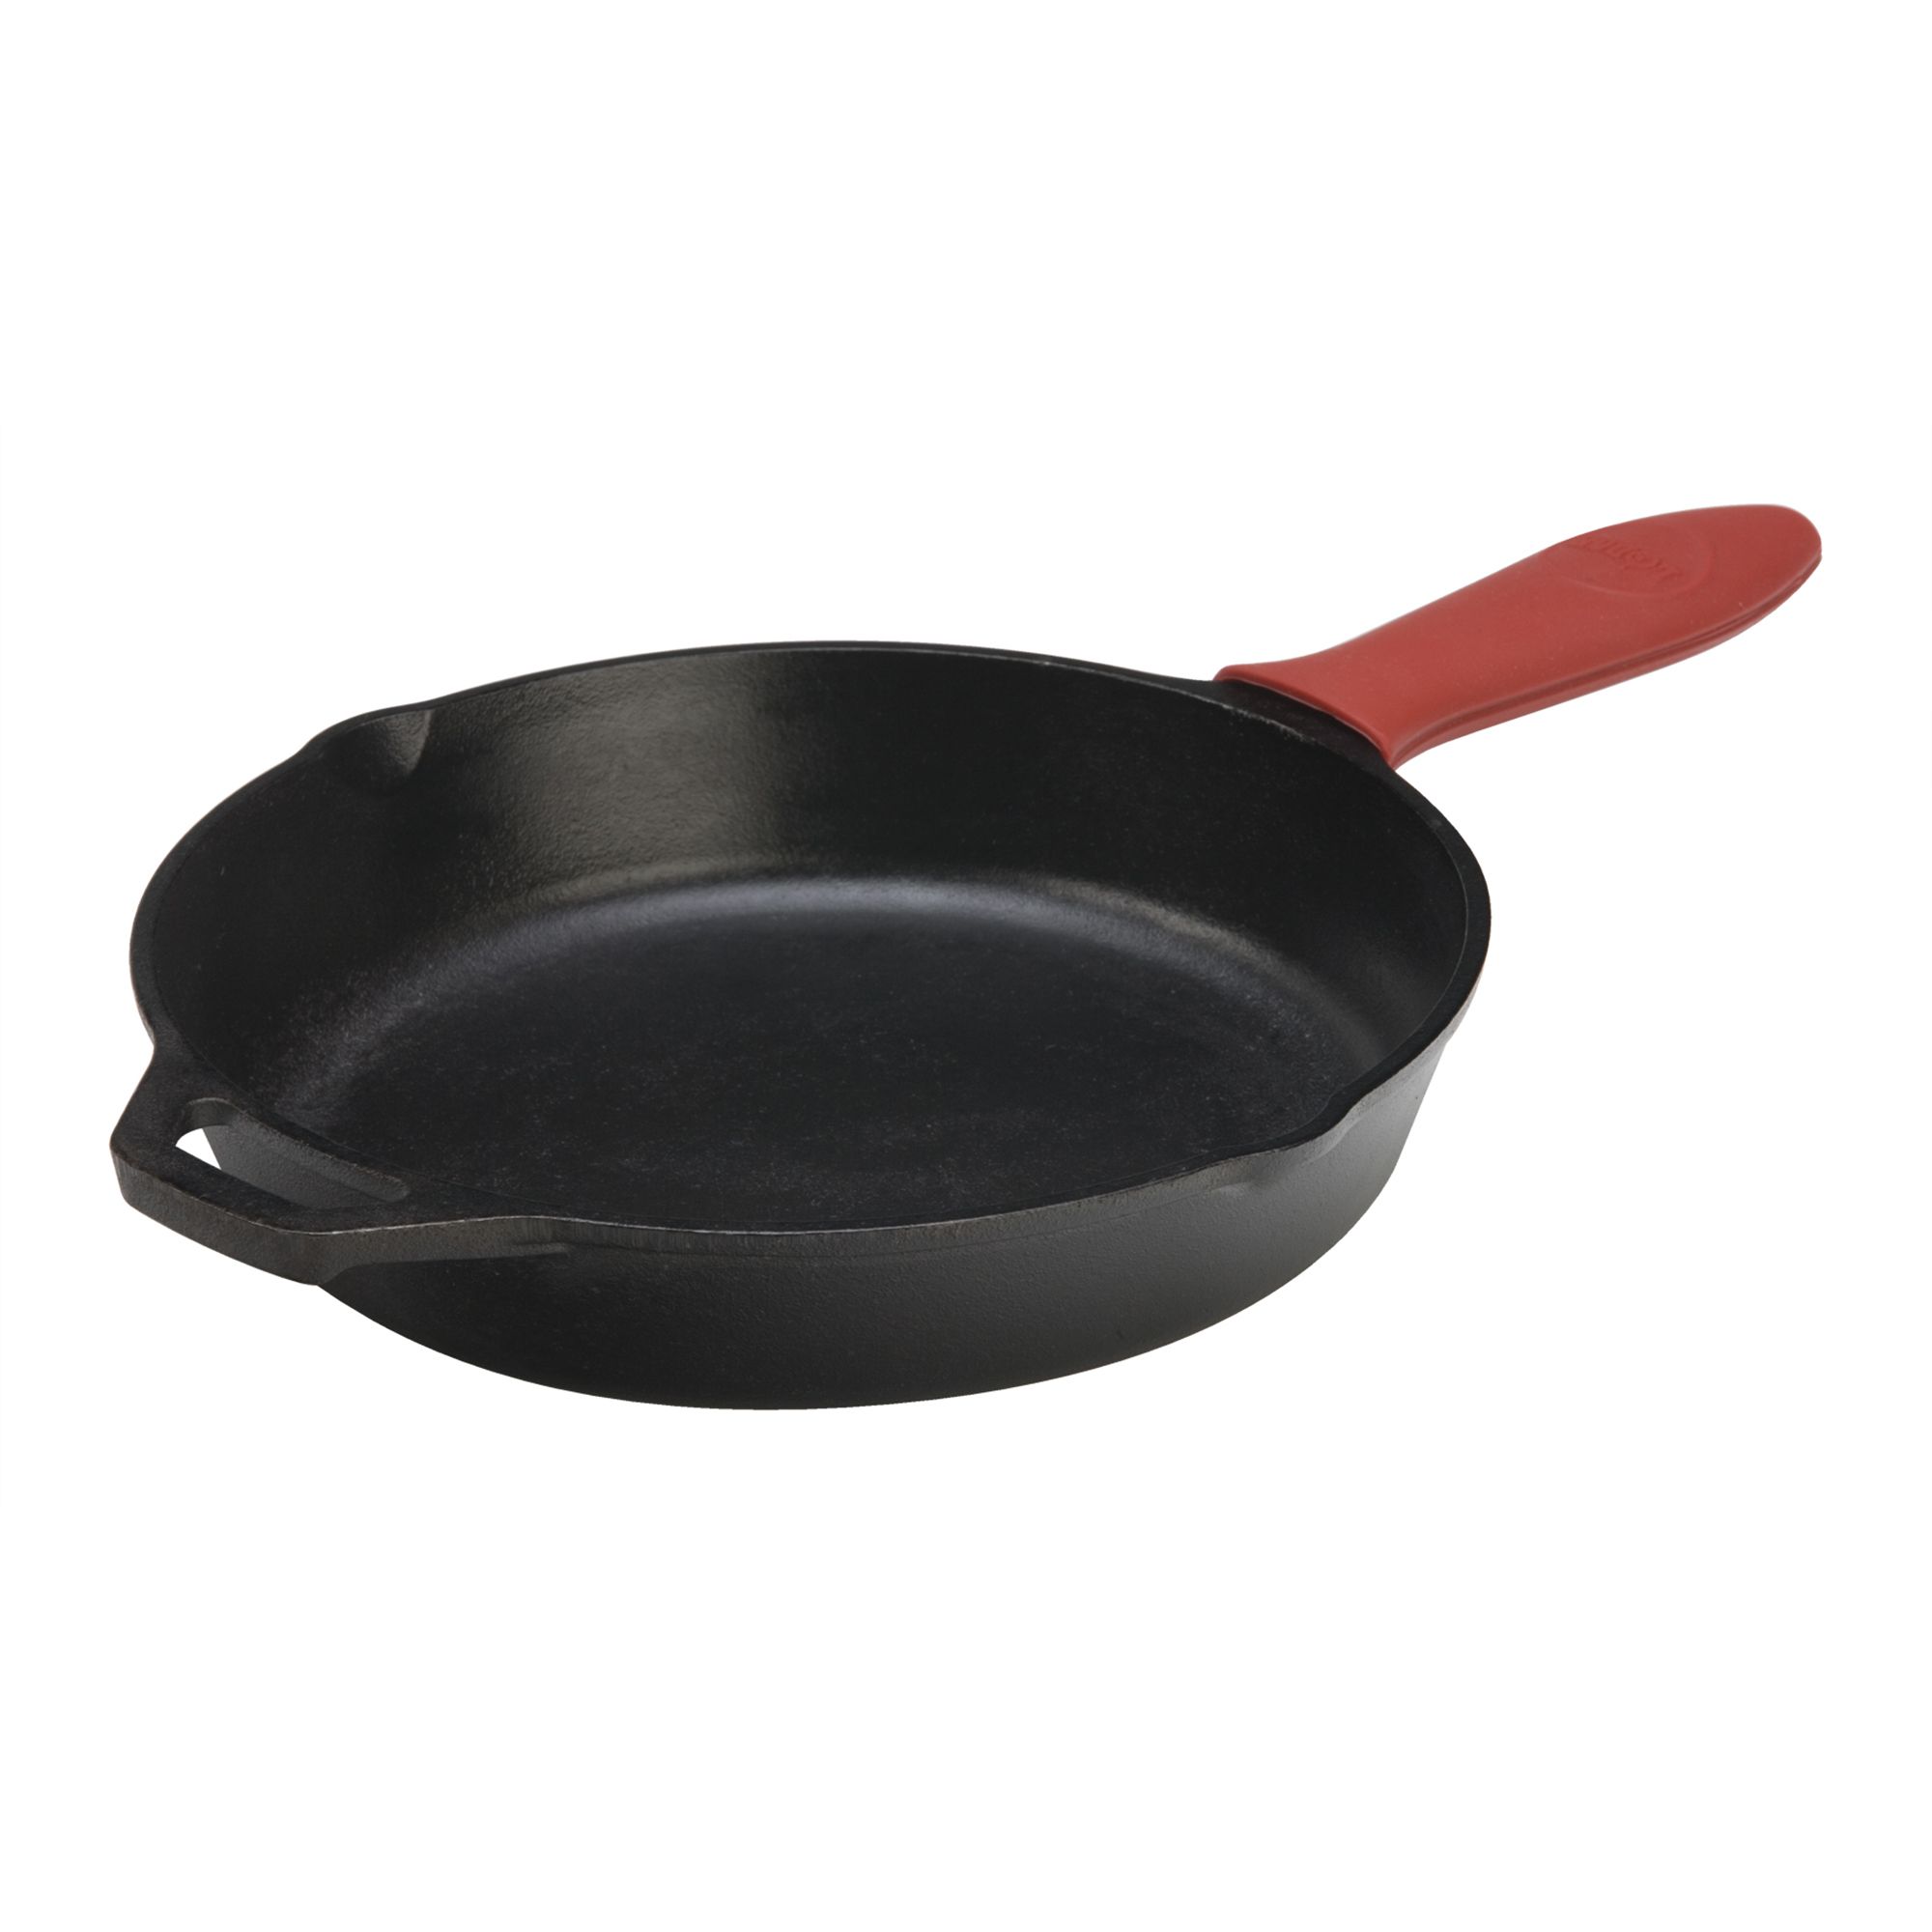 Lodge Cast Iron Deep Skillet, 12 inch & Silicone Hot Handle Holder - Red  Heat Protecting Silicone Handle for Cast Iron Skillets with Keyhole Handle